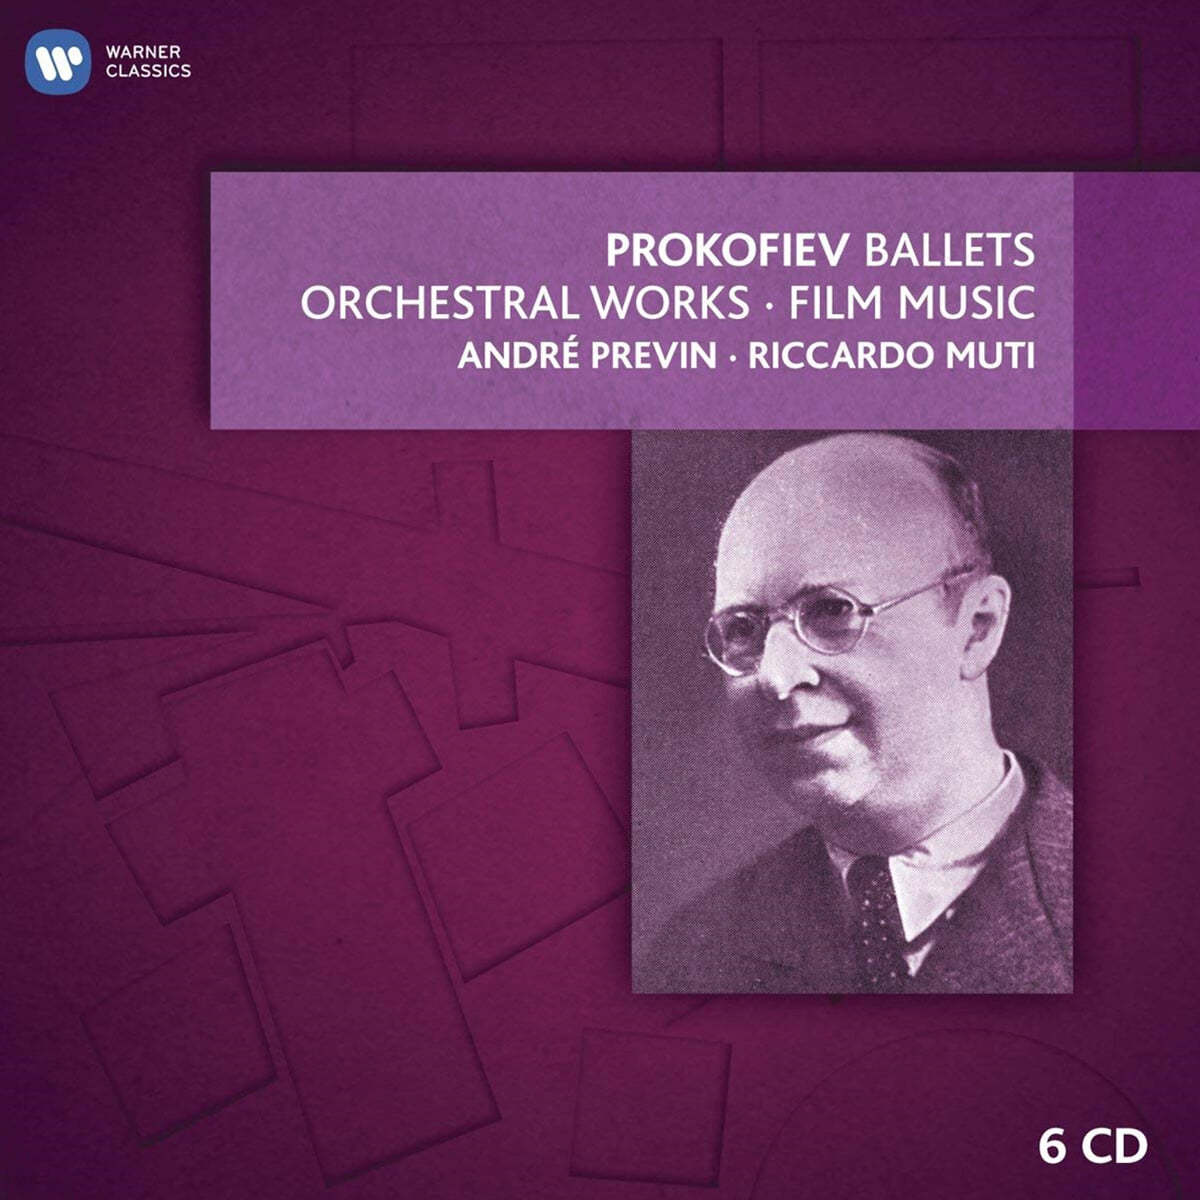 Andre Previn 프로코피예프: 발레와 관현악 작품집 (Prokofiev : Ballets and Orchestral Works) - 앙드레 프레빈 